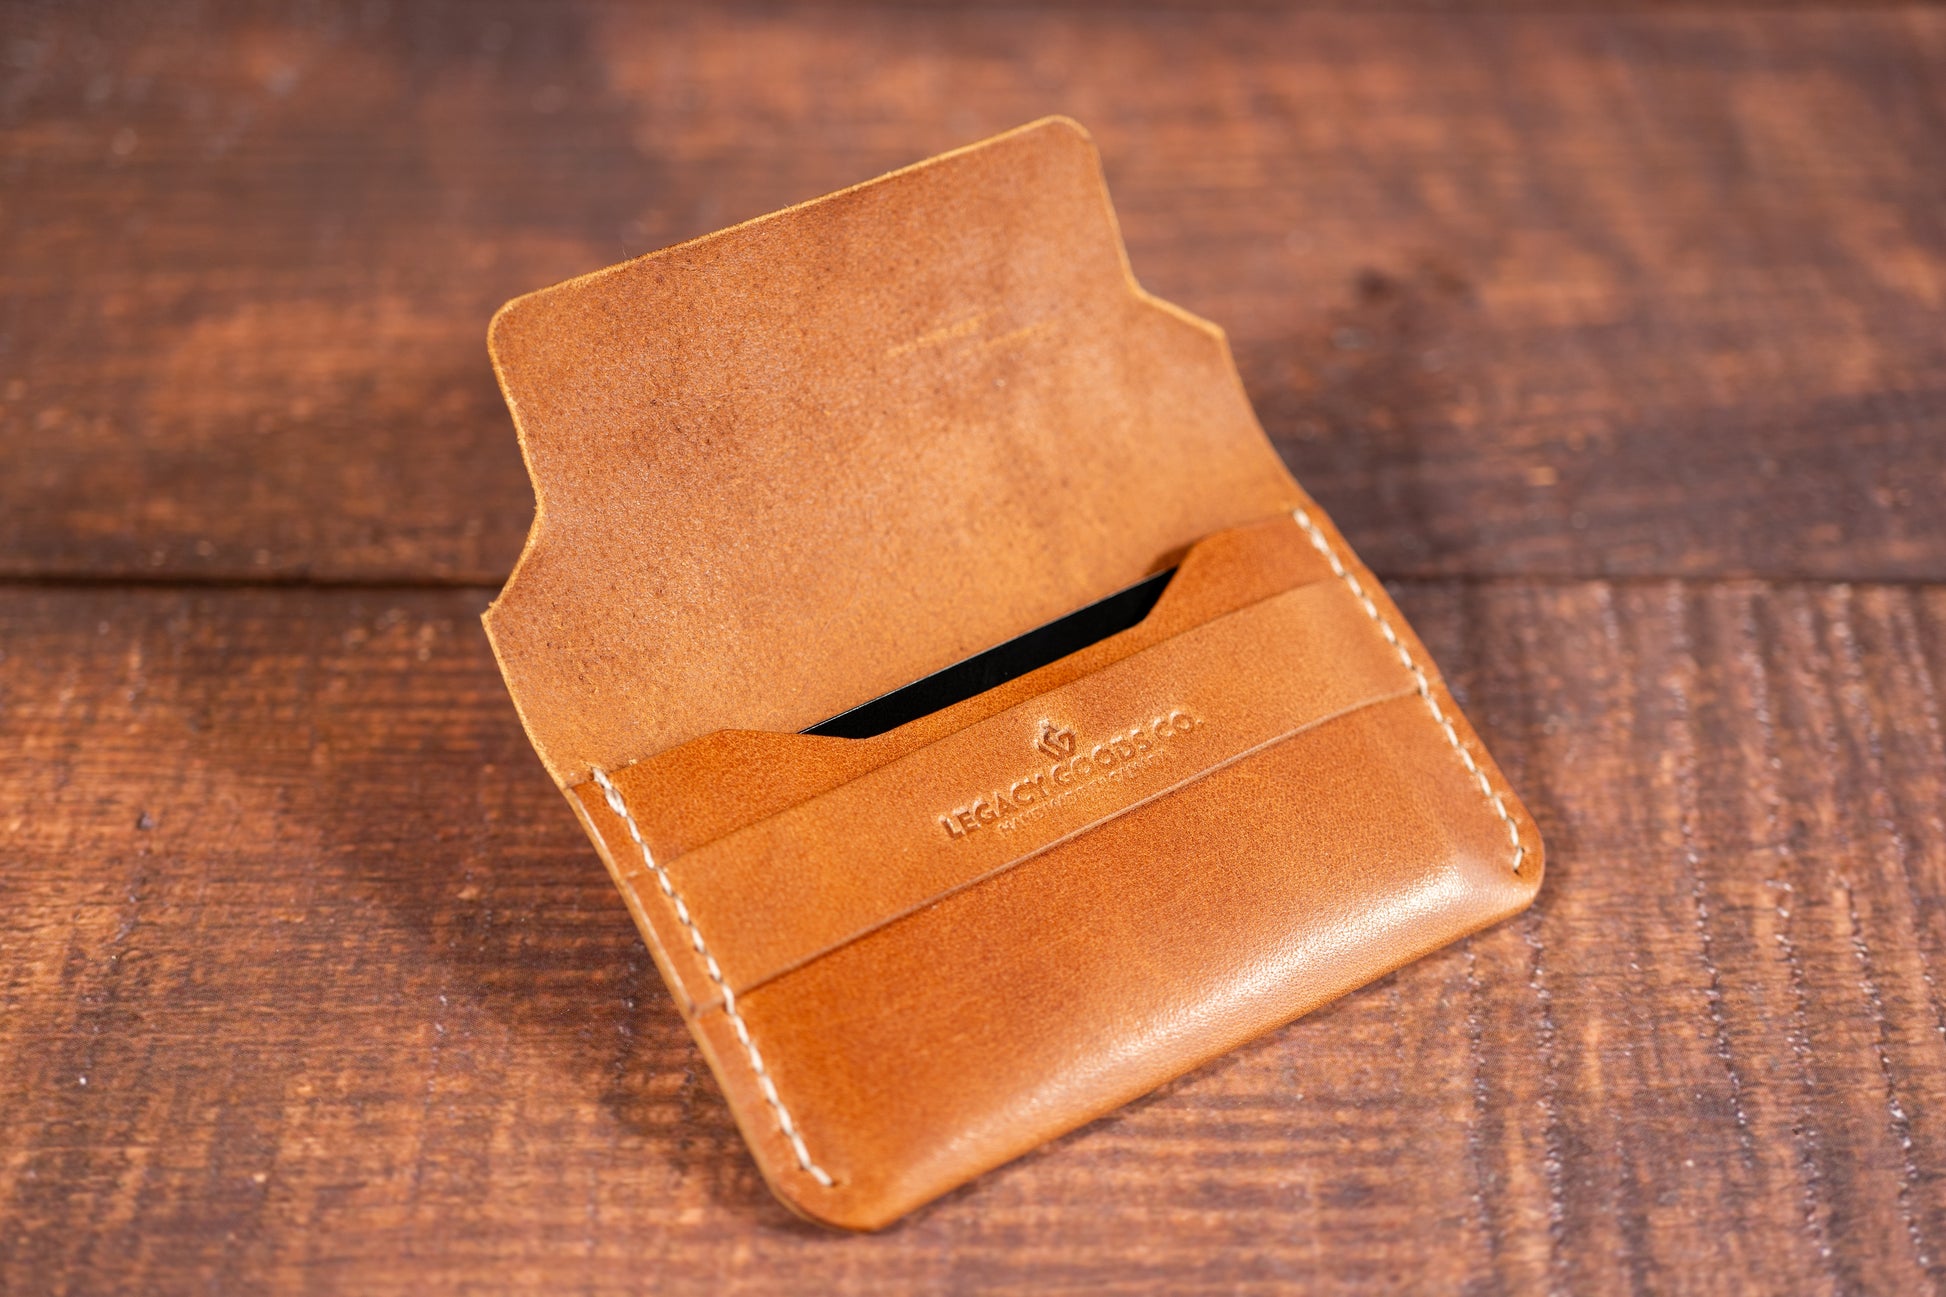 Compact C2 Wallet for easy portability